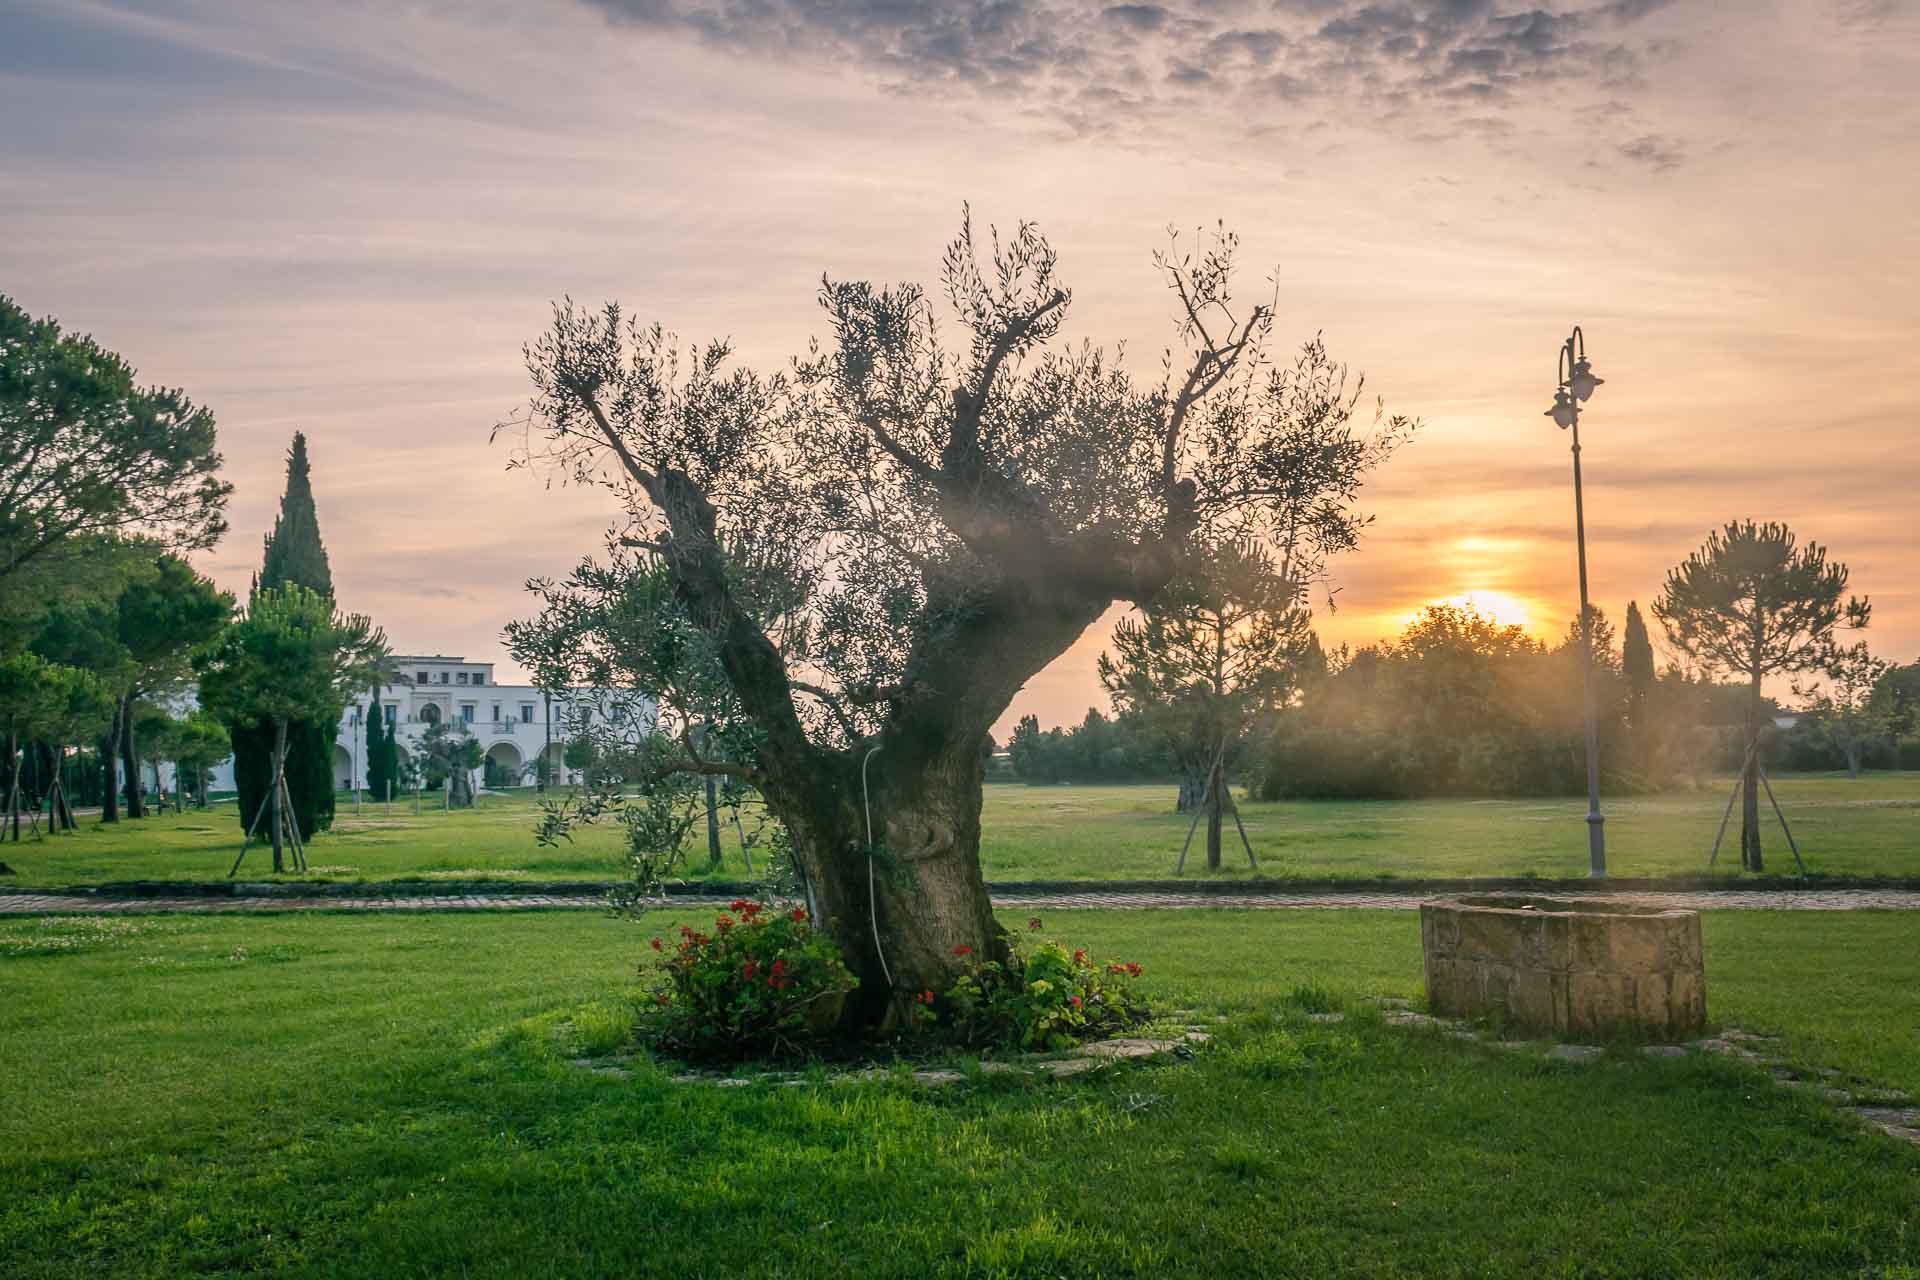 An old olive tree in the middle of a field with the sun setting in the horizon and a building in the back